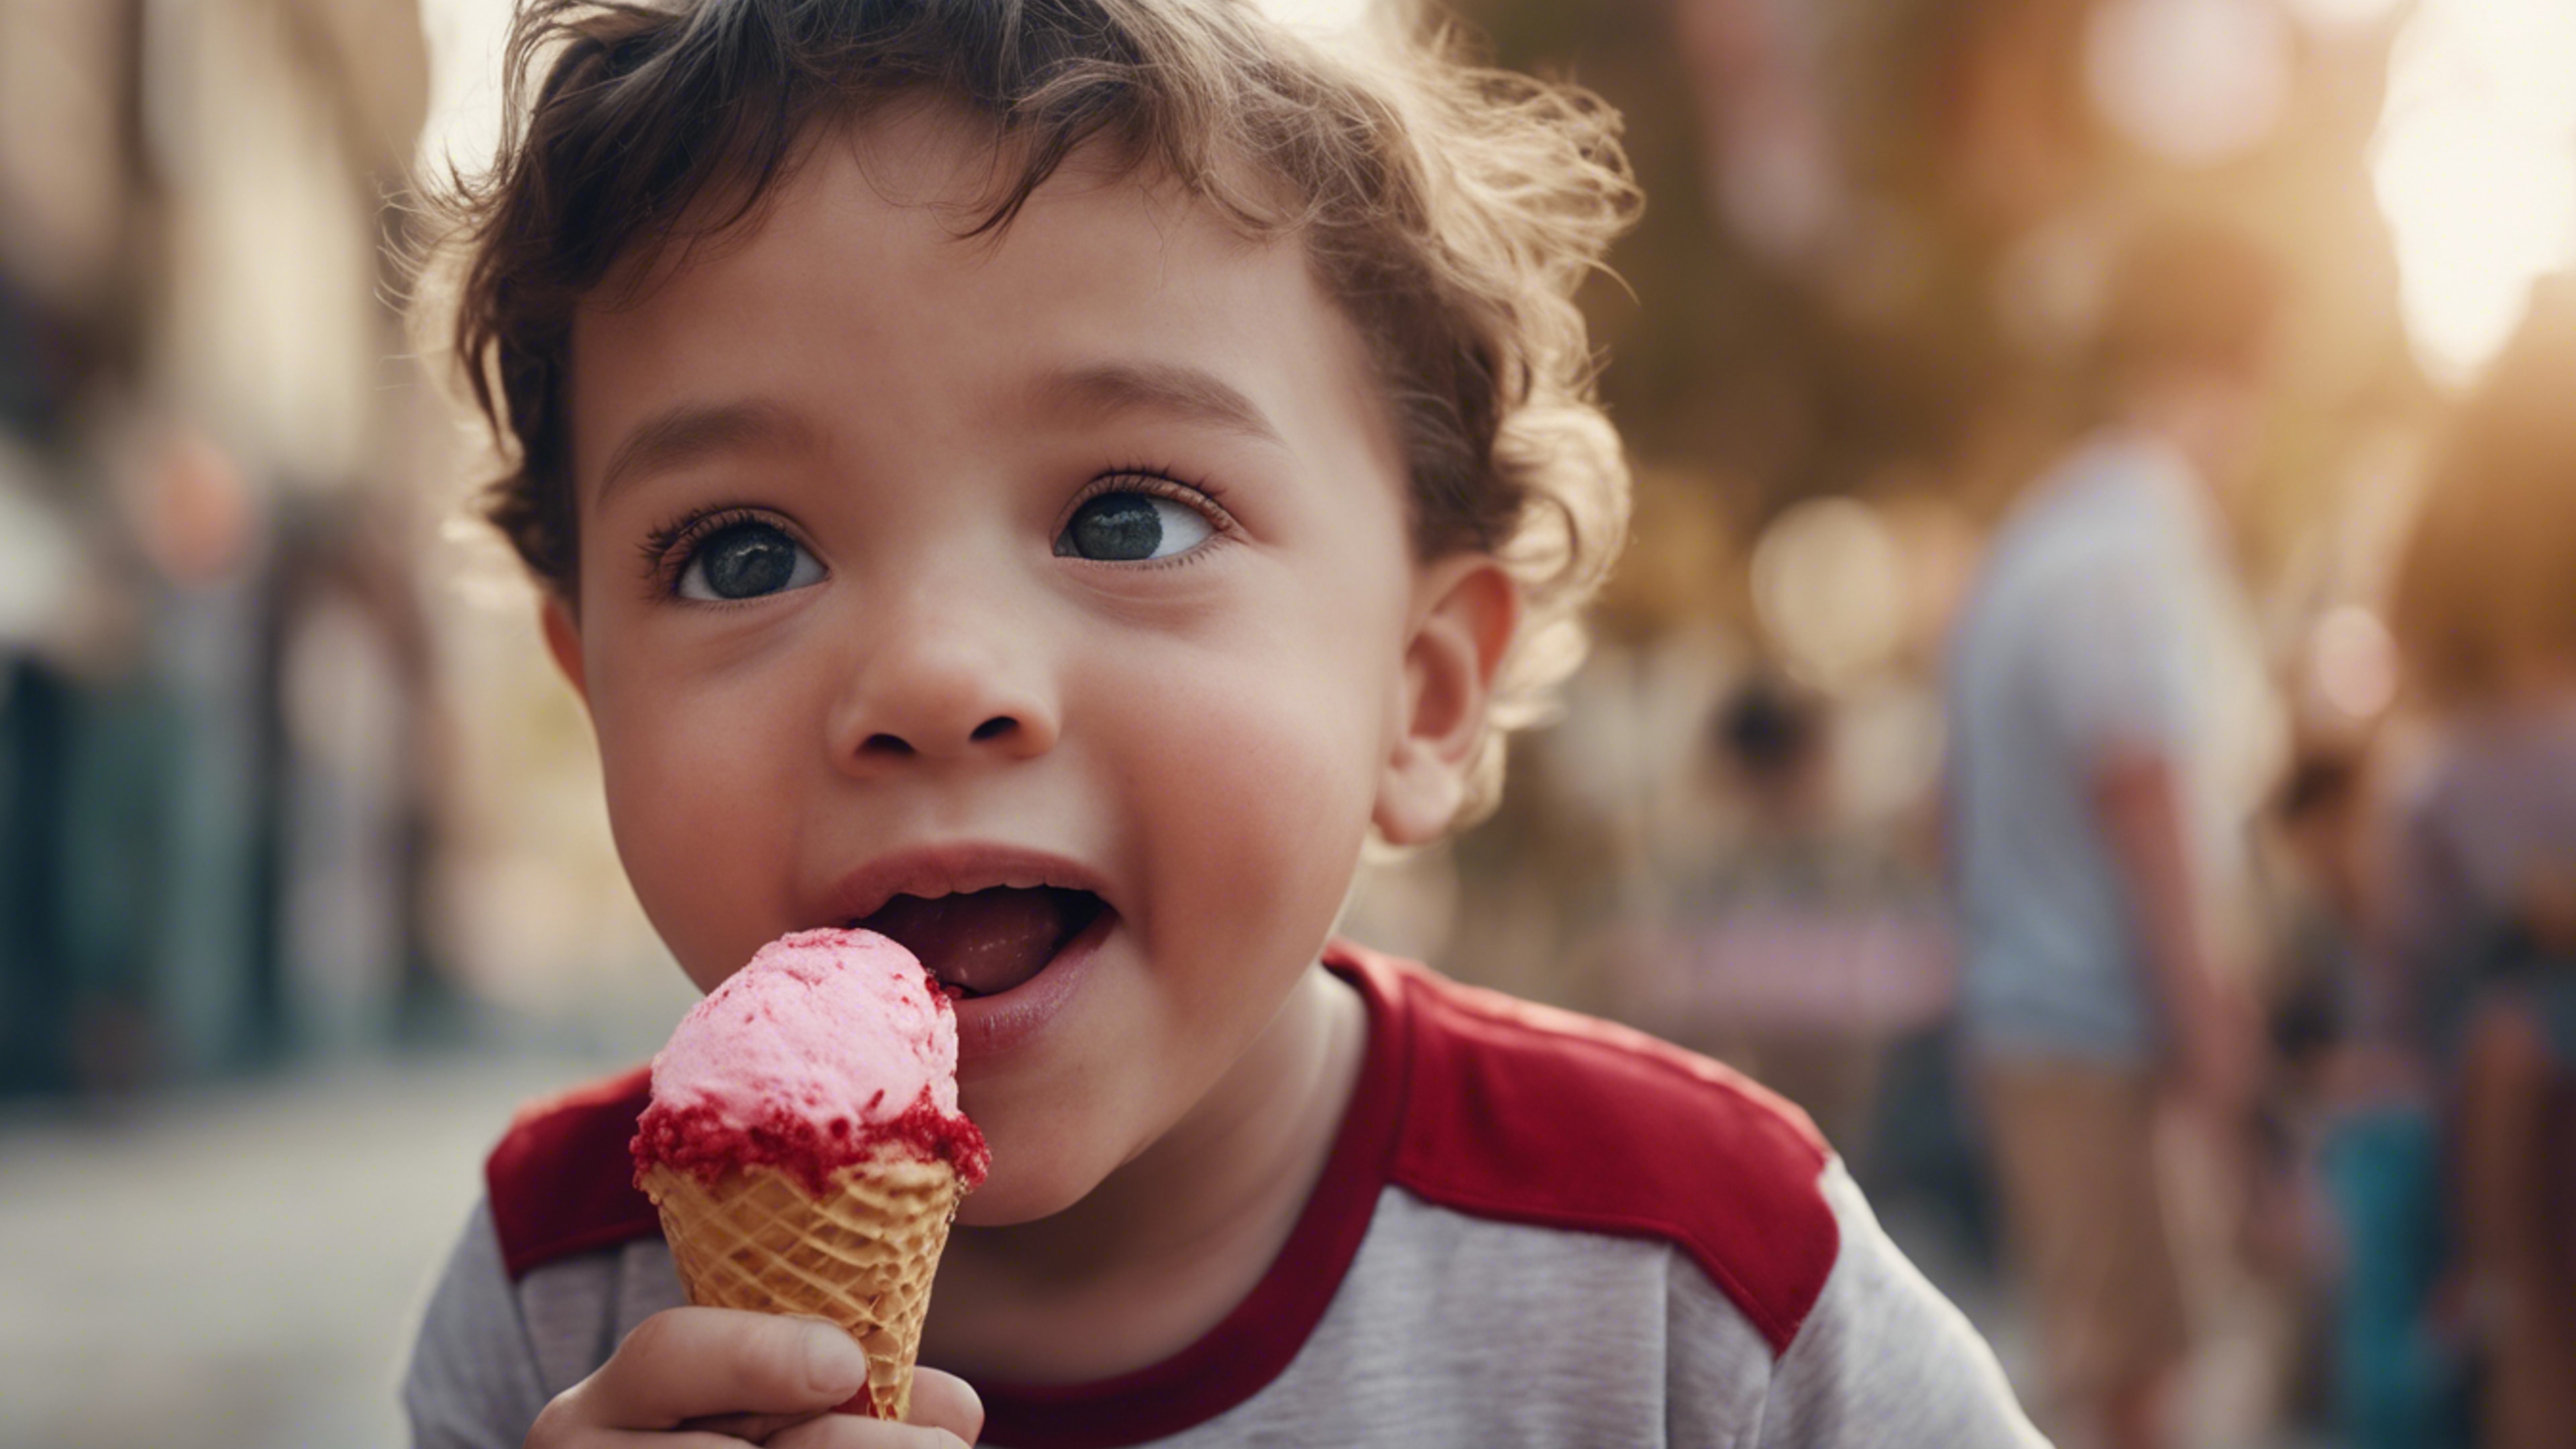 A small child delighting in a red velvet ice cream cone, with a wide-eyed expression of joy on his face. Валлпапер[7a3fbd1e60614c42931f]